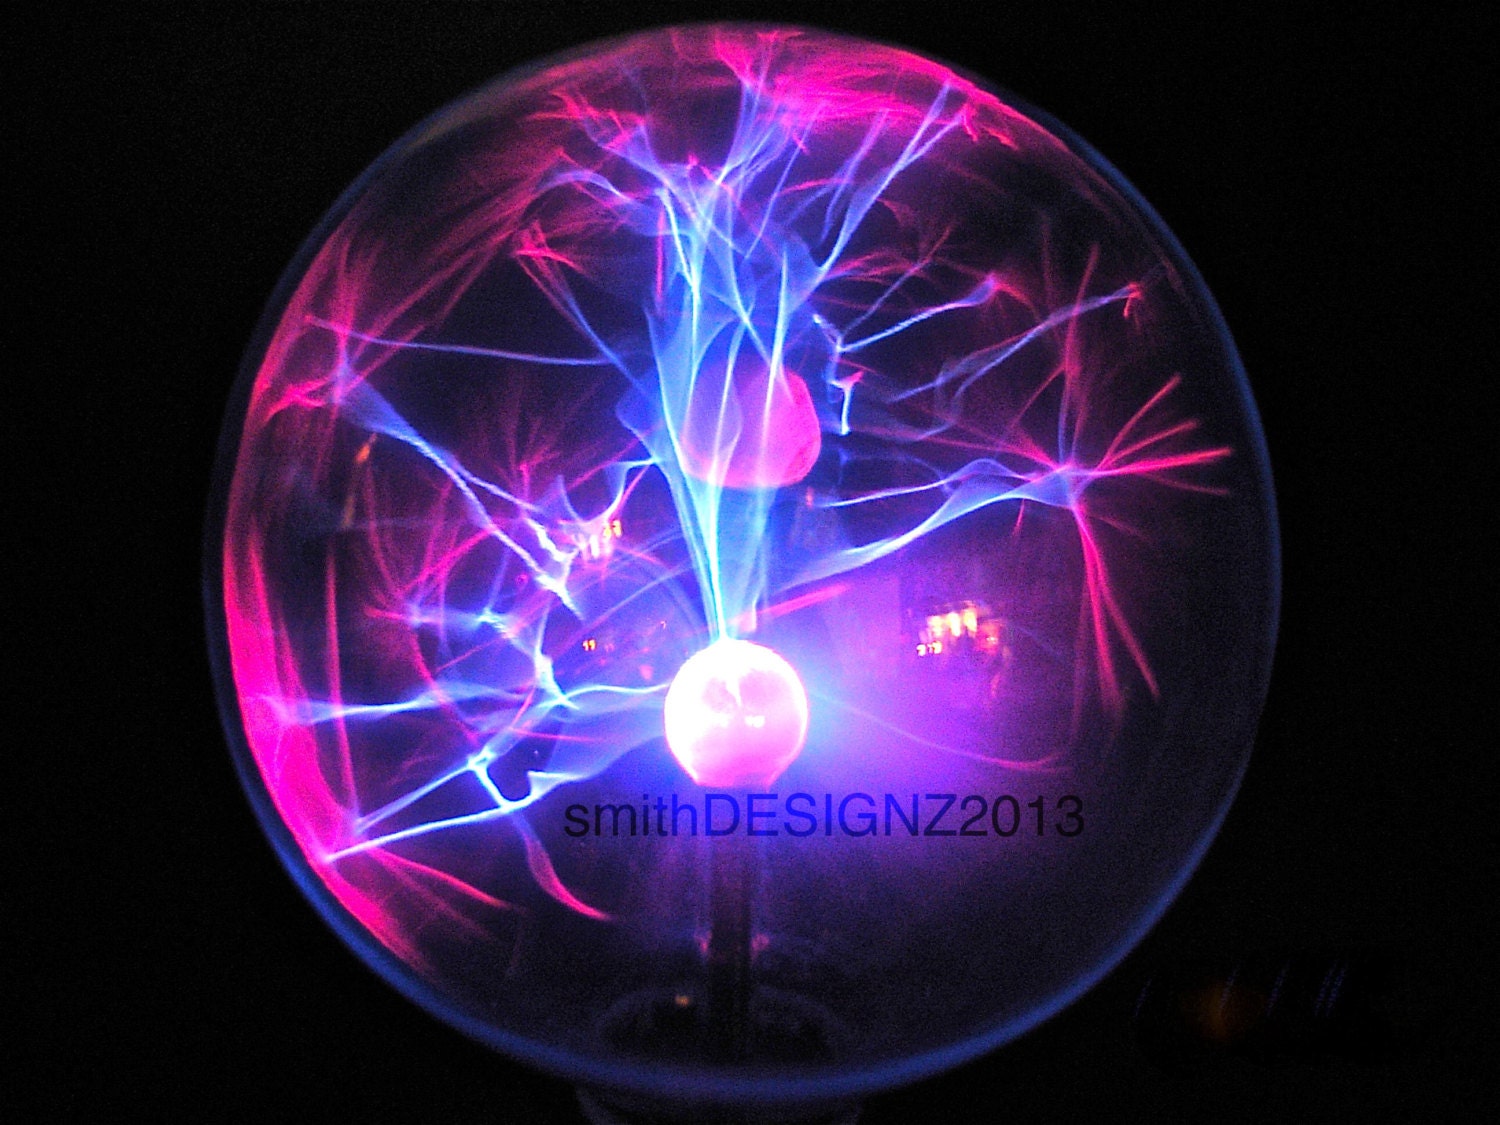 Electric Ball Science Photography Home Decor by by smithDESIGNZ